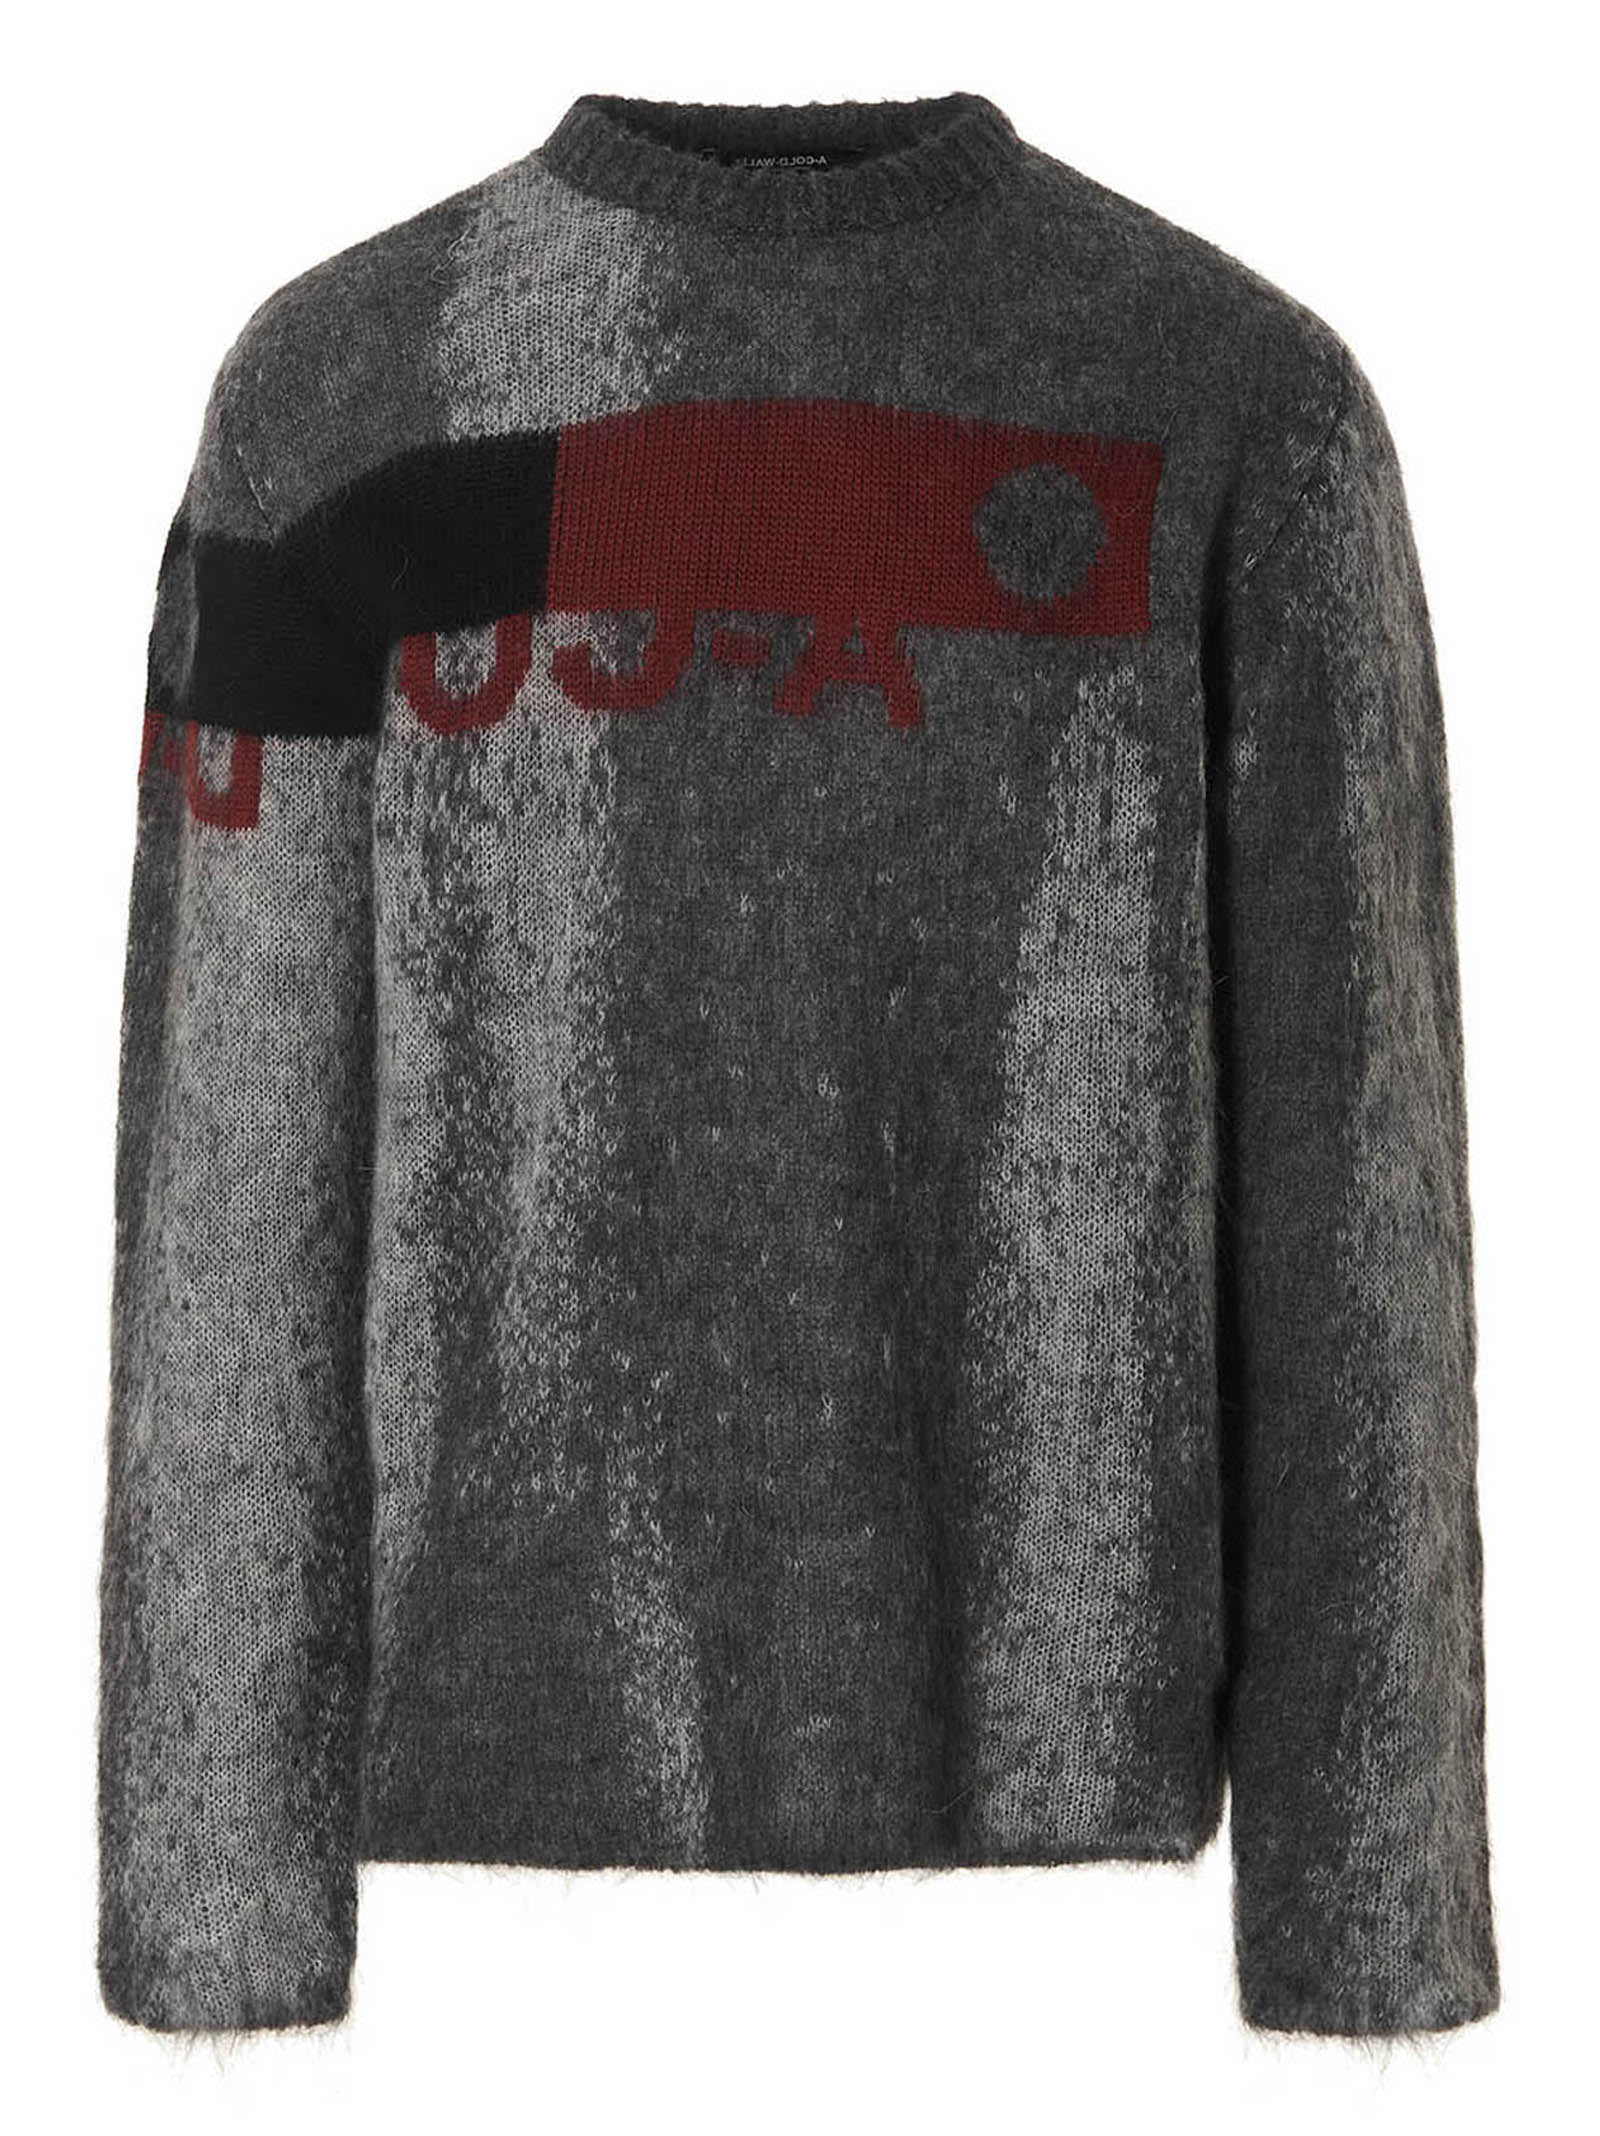 A-COLD-WALL sprayed Jaquard Sweater